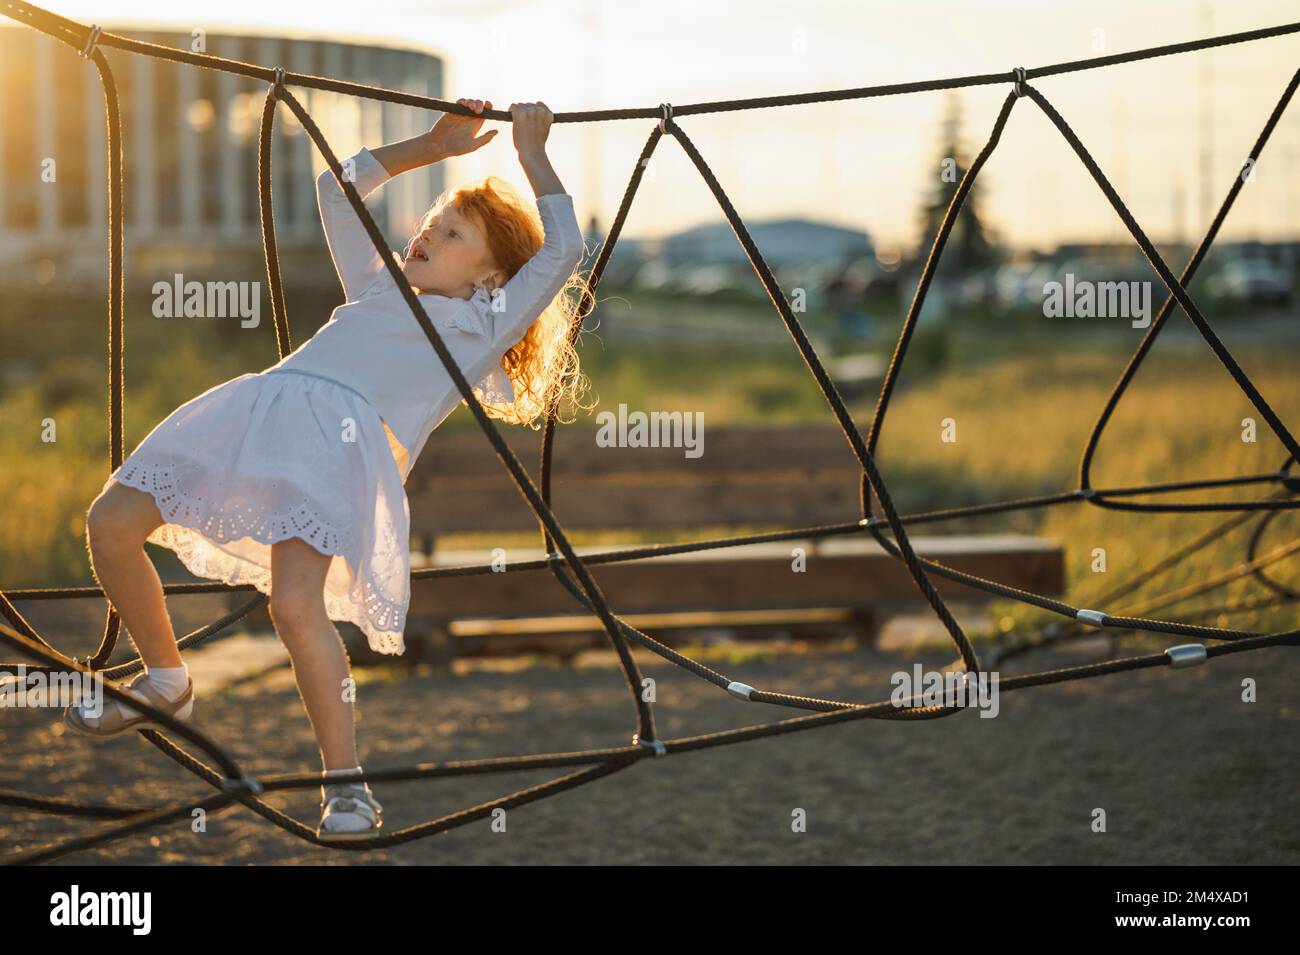 Girl climbing rope ladder in park Stock Photo